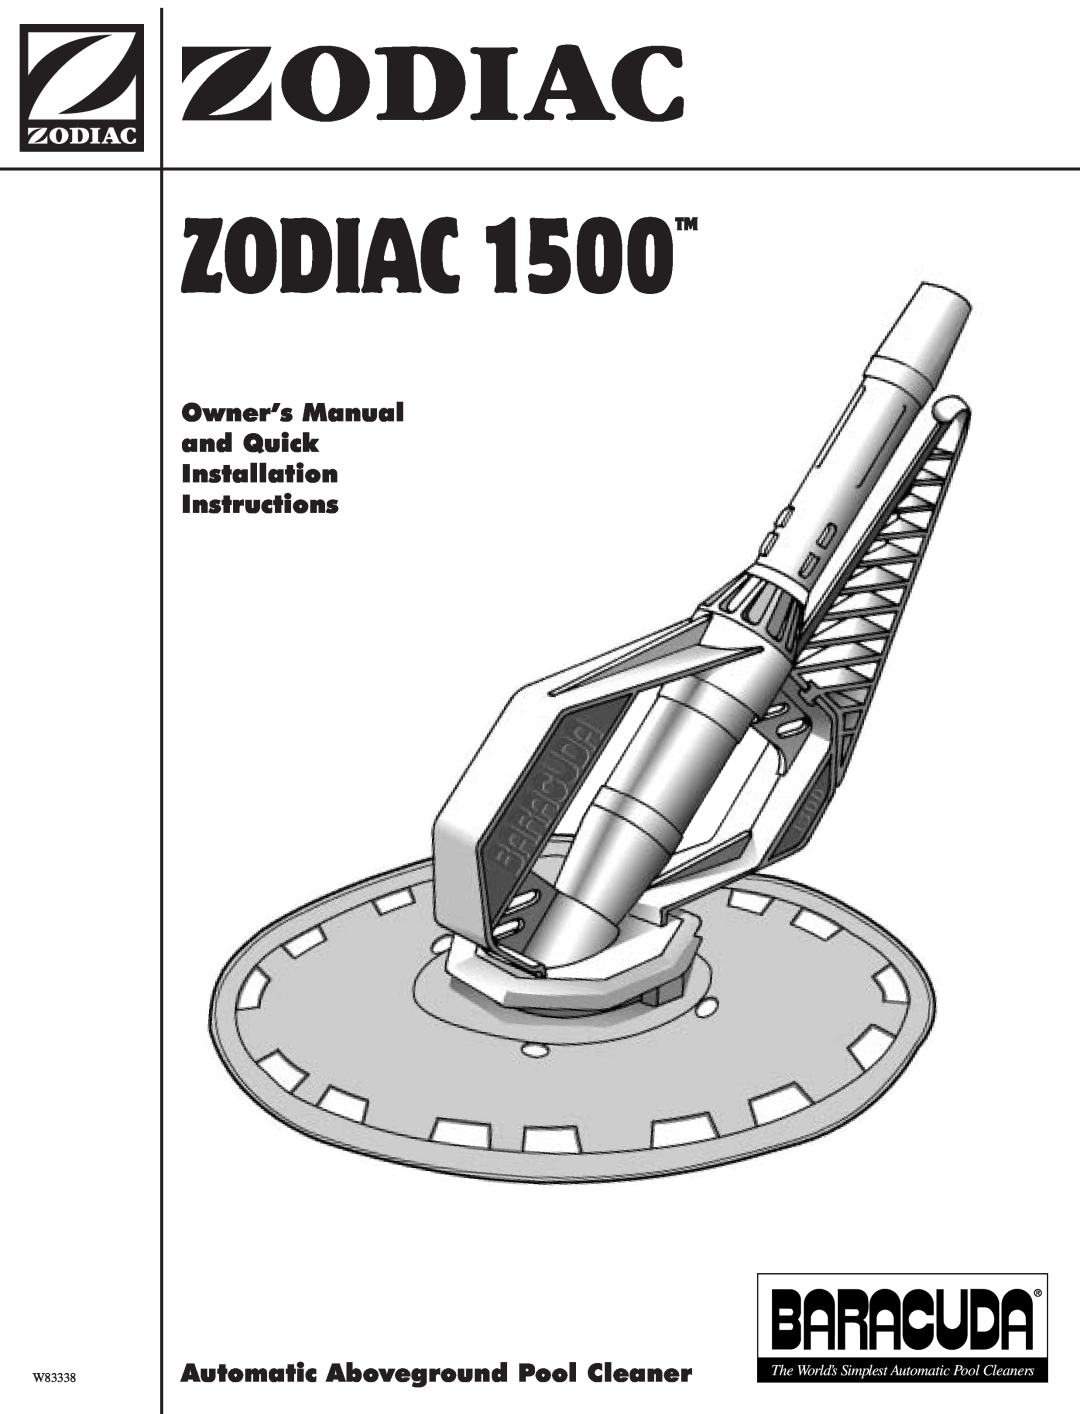 Baracoda 1500 owner manual Zodiac, Owner’s Manual and Quick Installation Instructions 